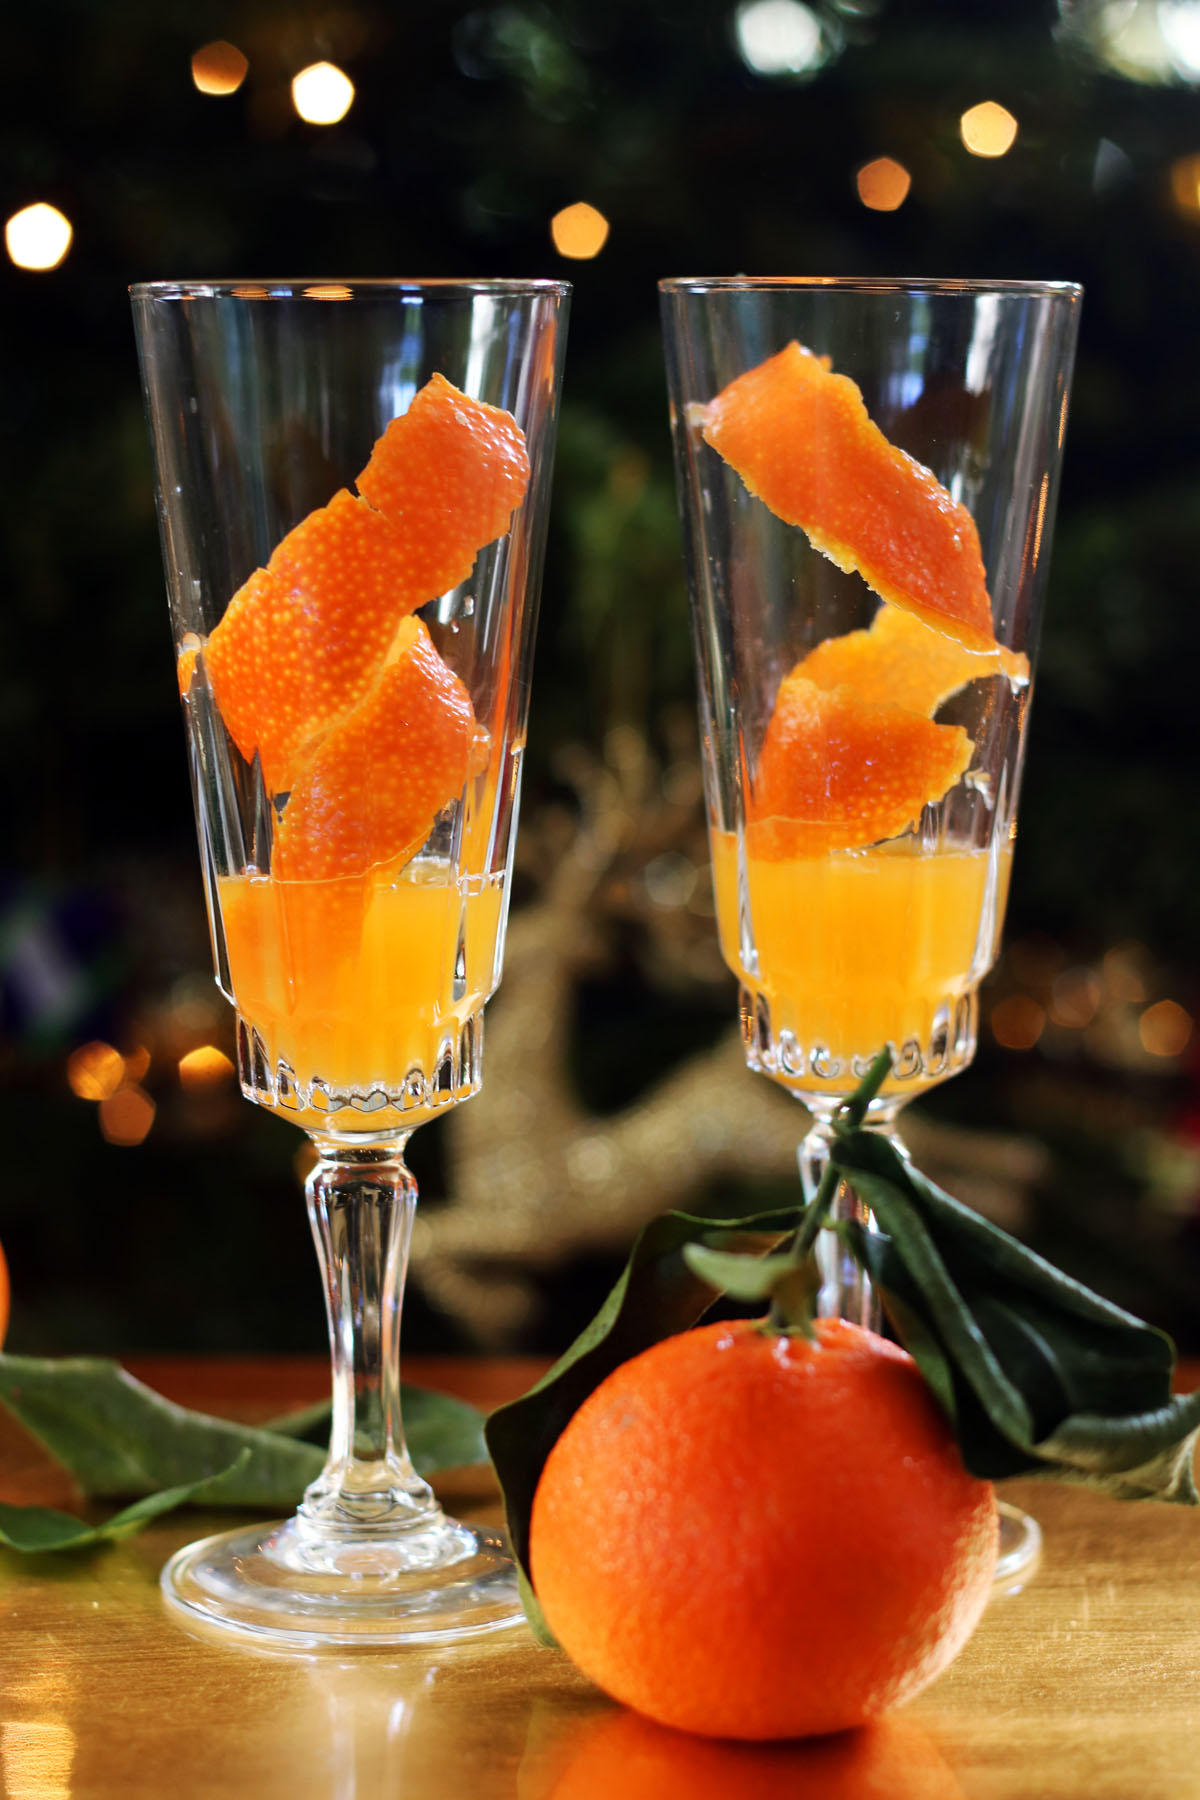 Celebrate the New Year with this delicious Clementine Mimosa, made with fresh clementine juice and prosecco. Get this festive brunch cocktail recipe at Supper in the Suburbs!